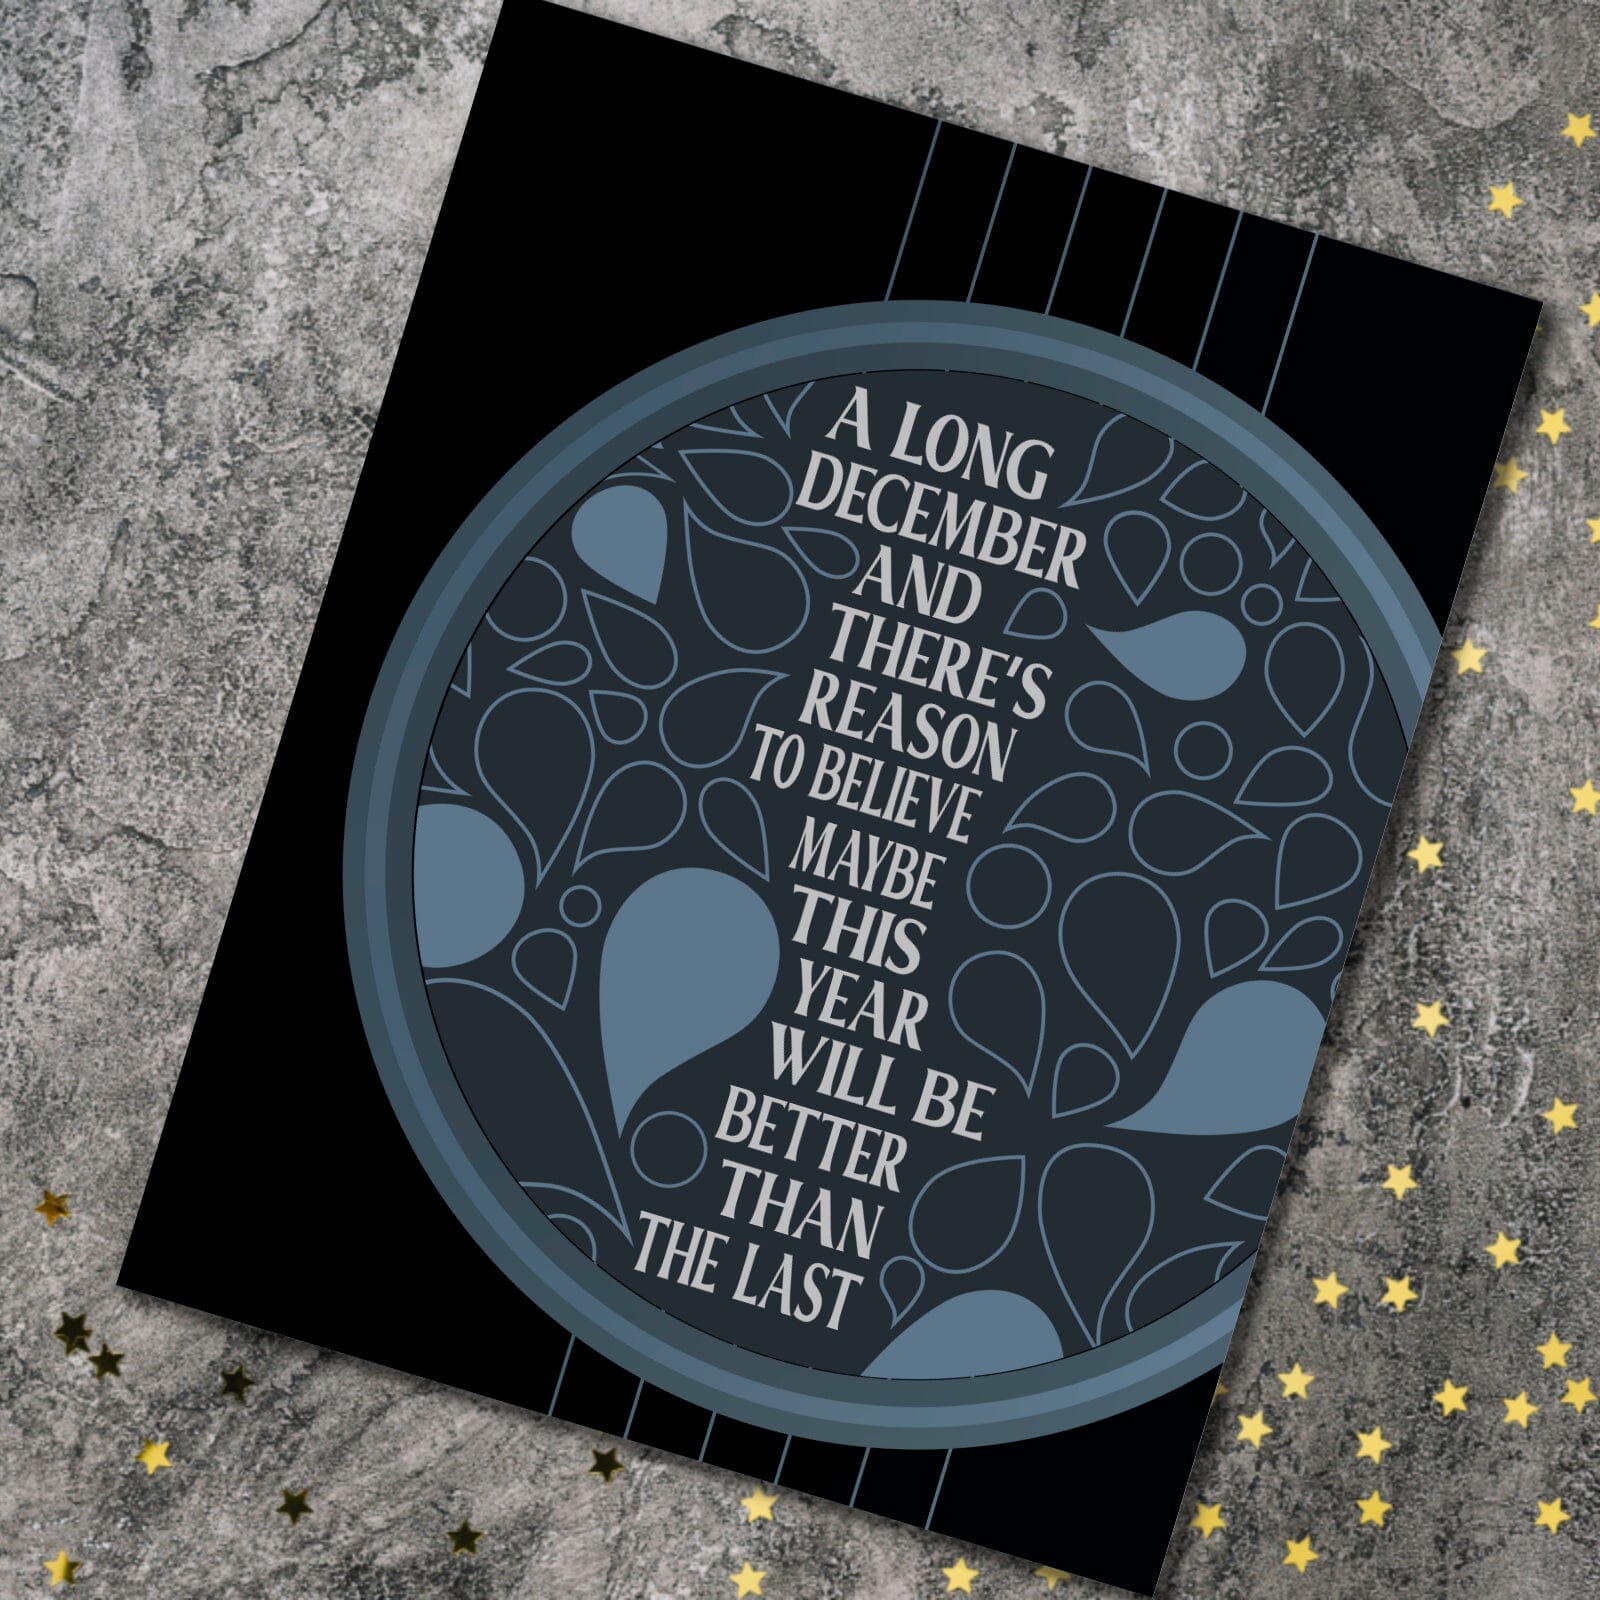 A Long December by the Counting Crows - Song Lyric Print Song Lyrics Art Song Lyrics Art 8x10 Unframed Print 